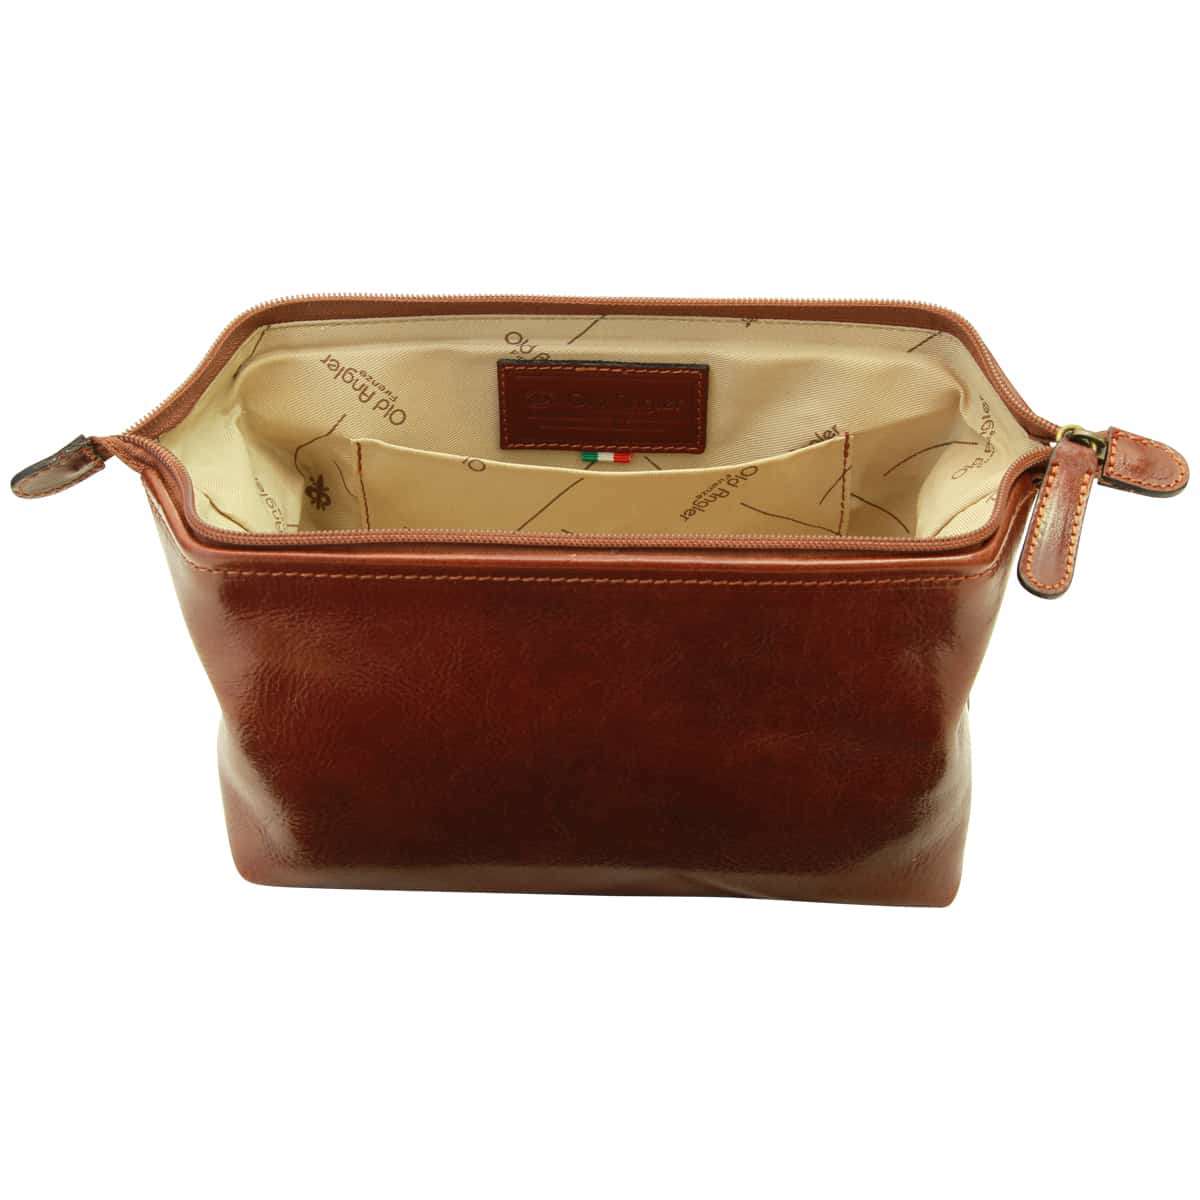 Cowhide beauty case - Brown | 401205MA UK | Old Angler Firenze